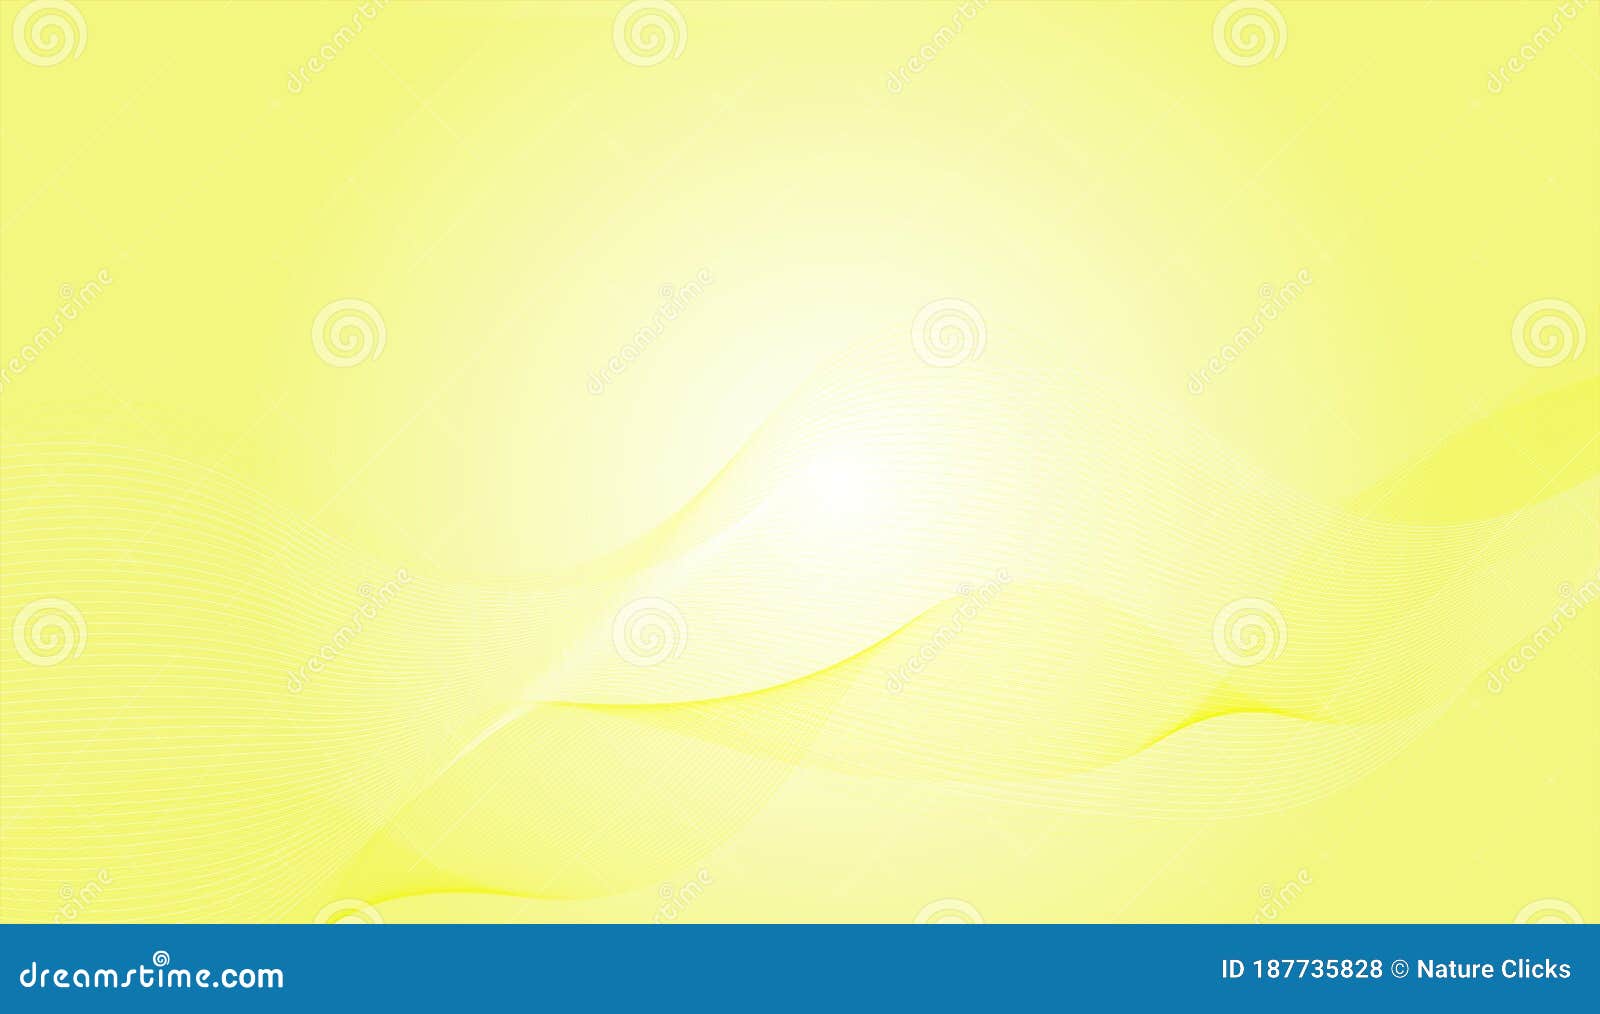 Light Backgrounds Wallpapers  Wallpaper Cave